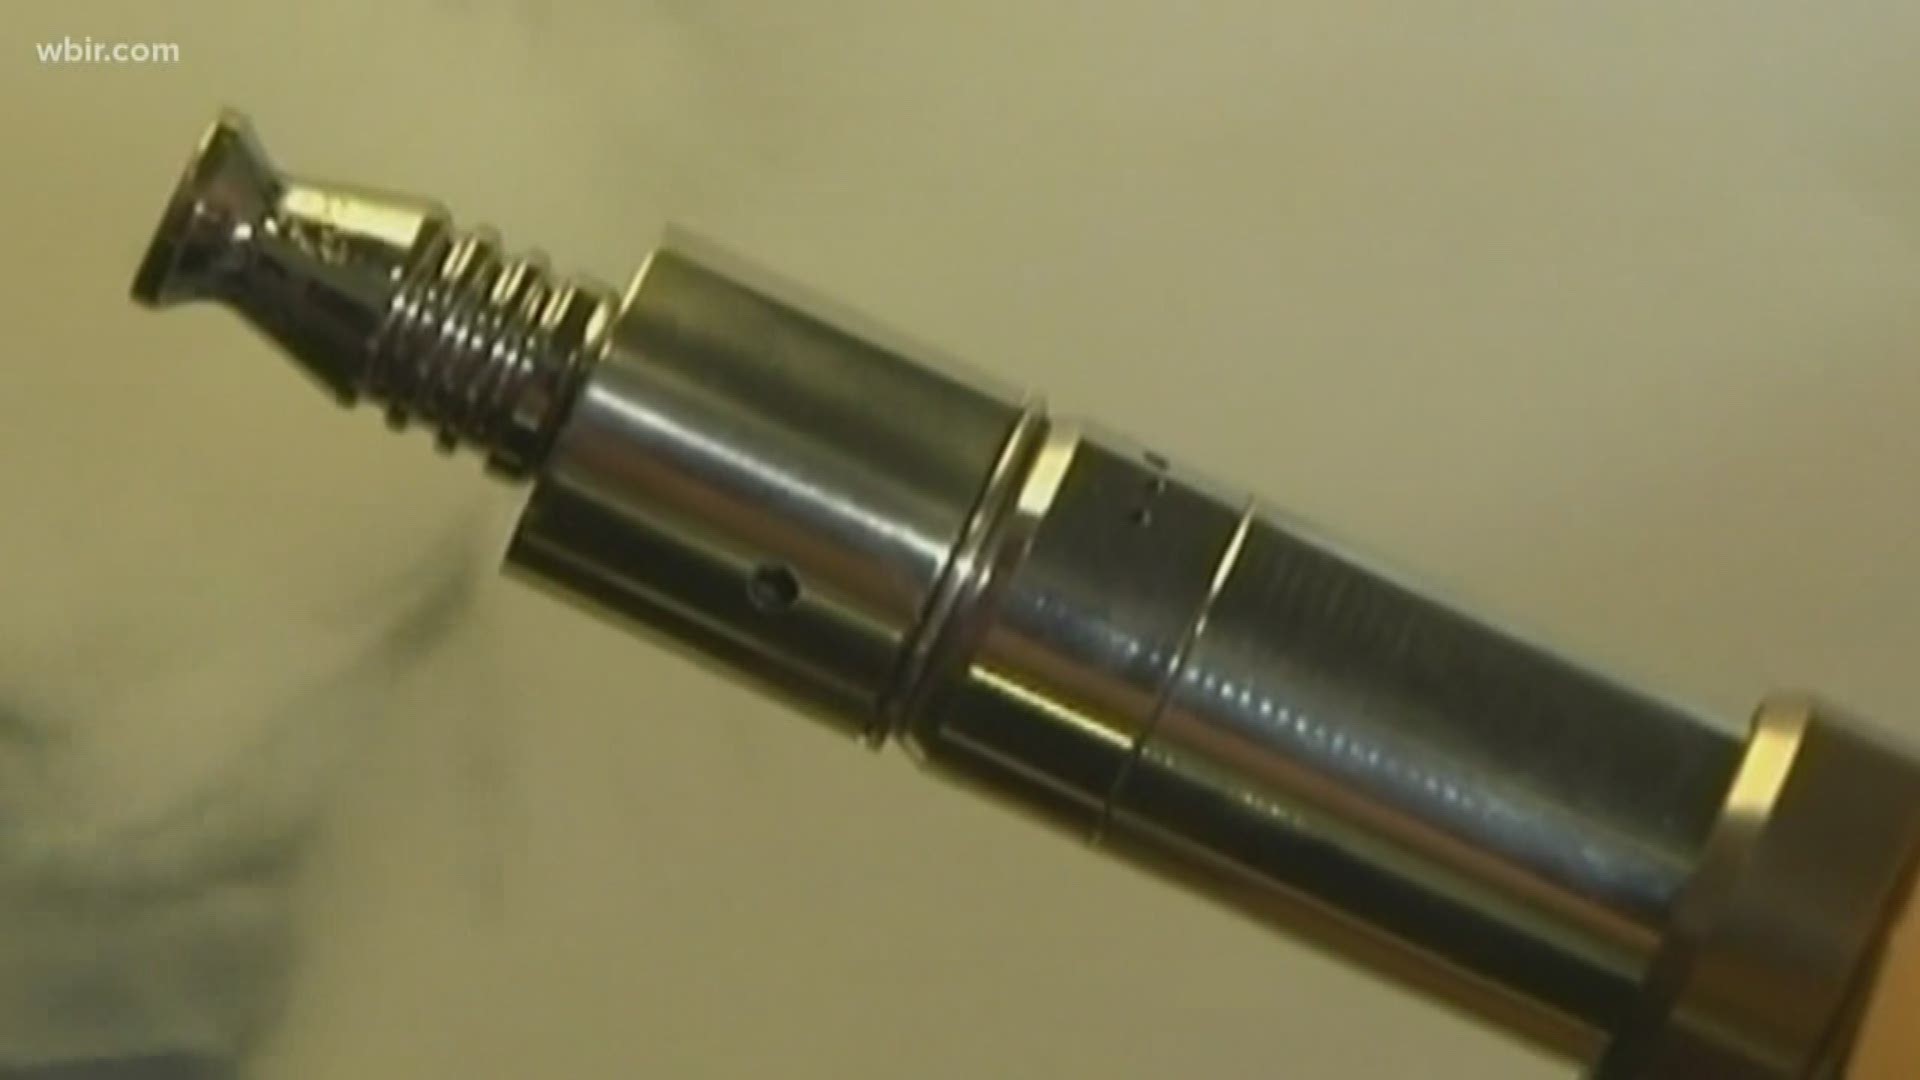 Sevier County Schools voted to update its tobacco policy with vaping guidelines tonight.